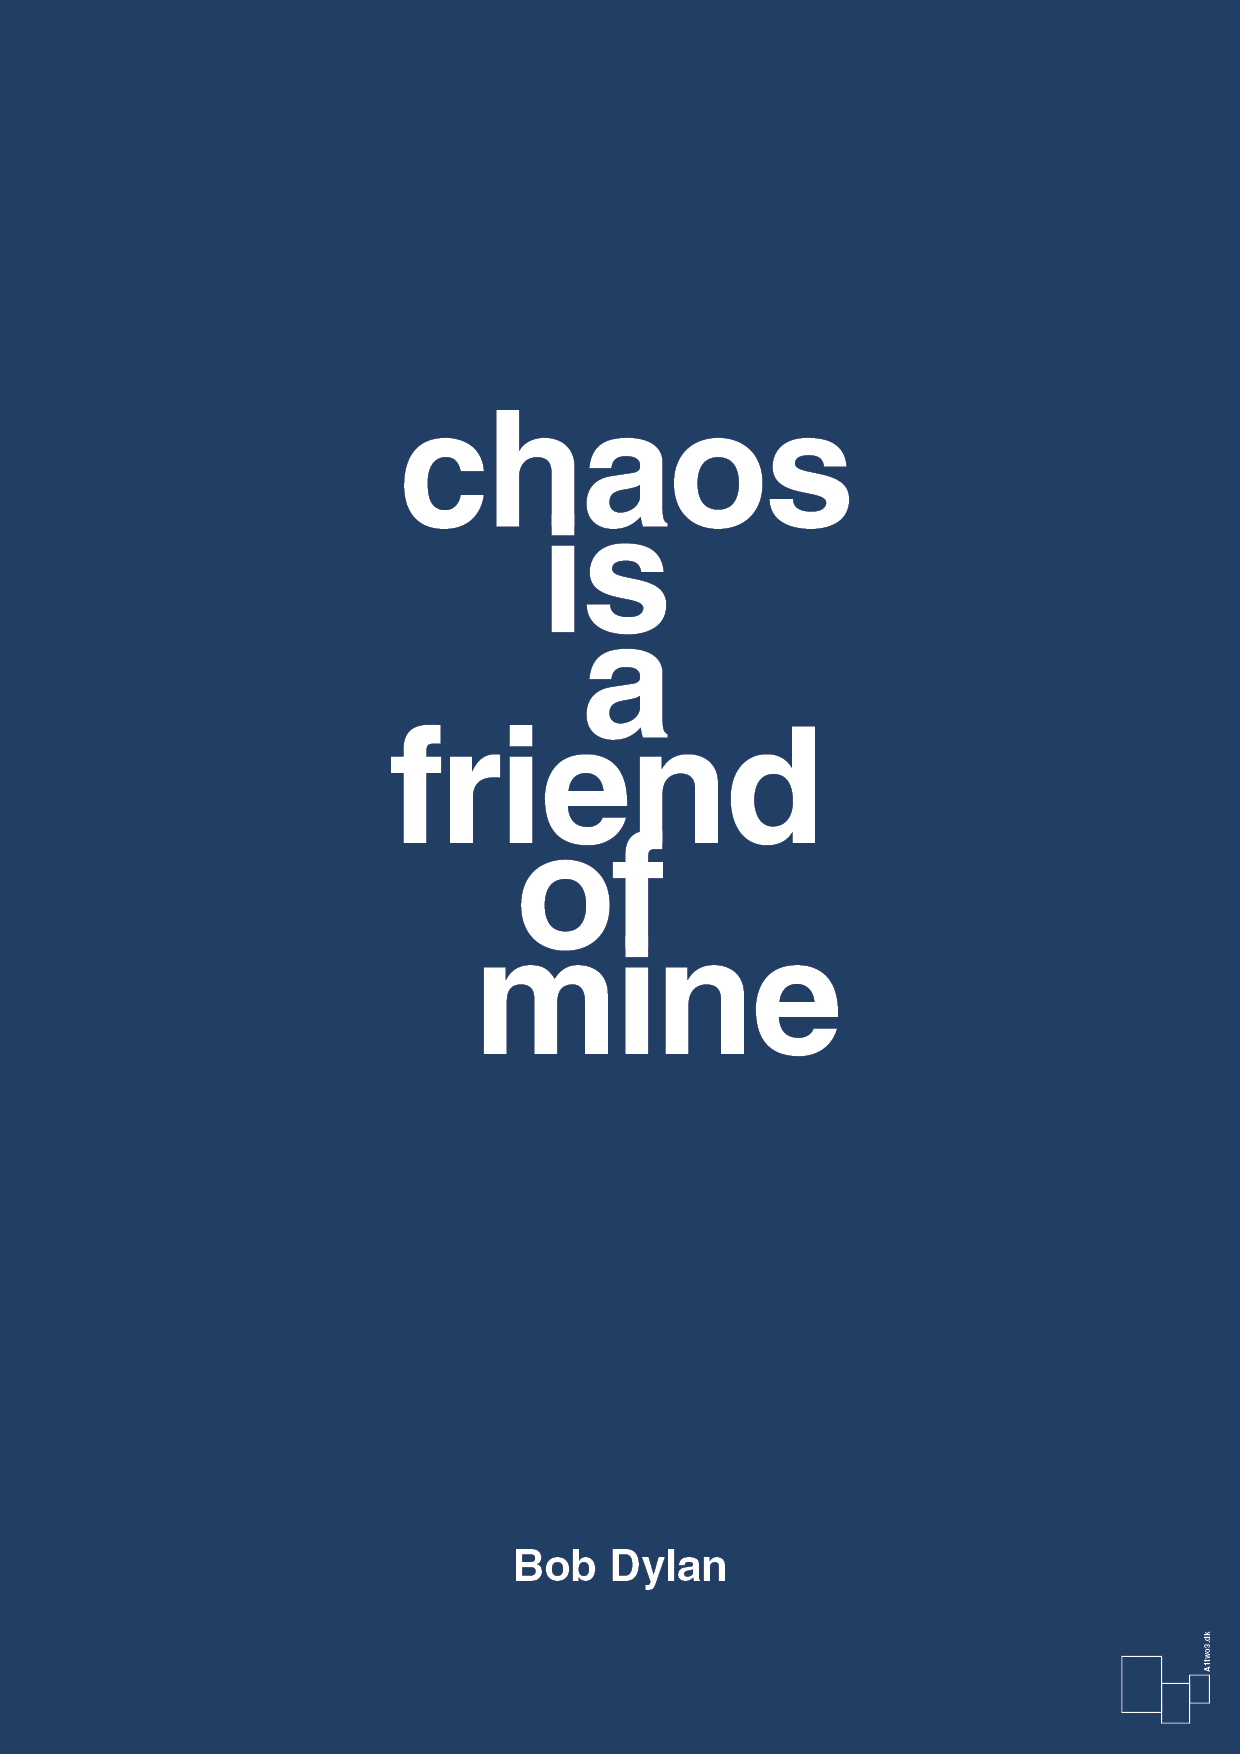 chaos is a friend of mine - Plakat med Citater i Lapis Blue